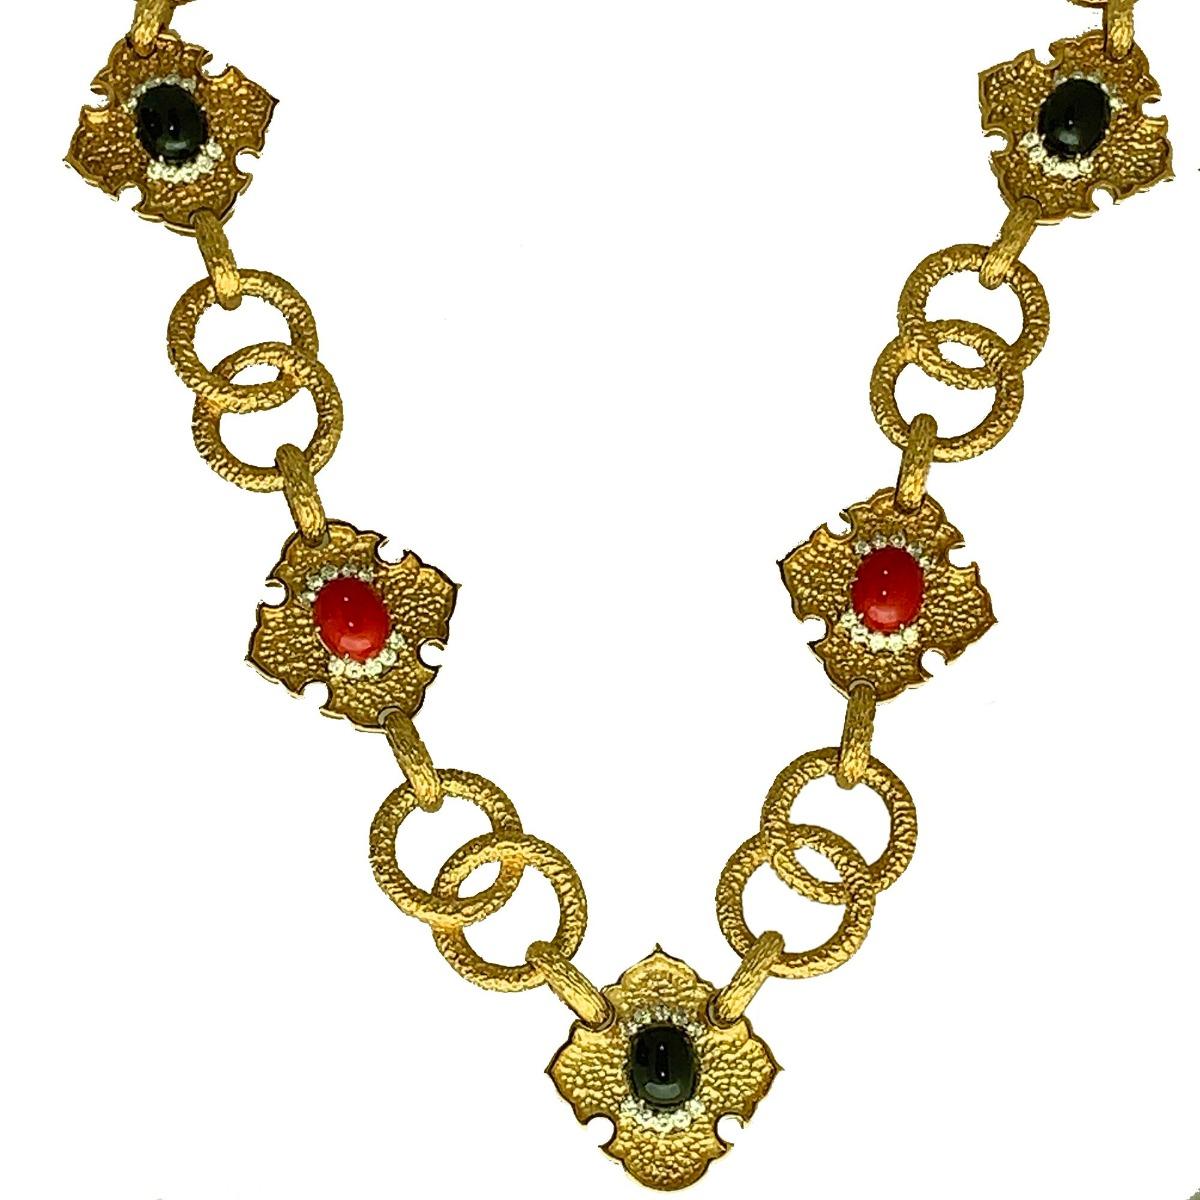 Metal: 18k Yellow Gold
Condition: Excellent
Item Weight: 196 grams
Length: 11.5 inch
Gemstone: Onyx, Coral & Diamond

SKU#N-01547